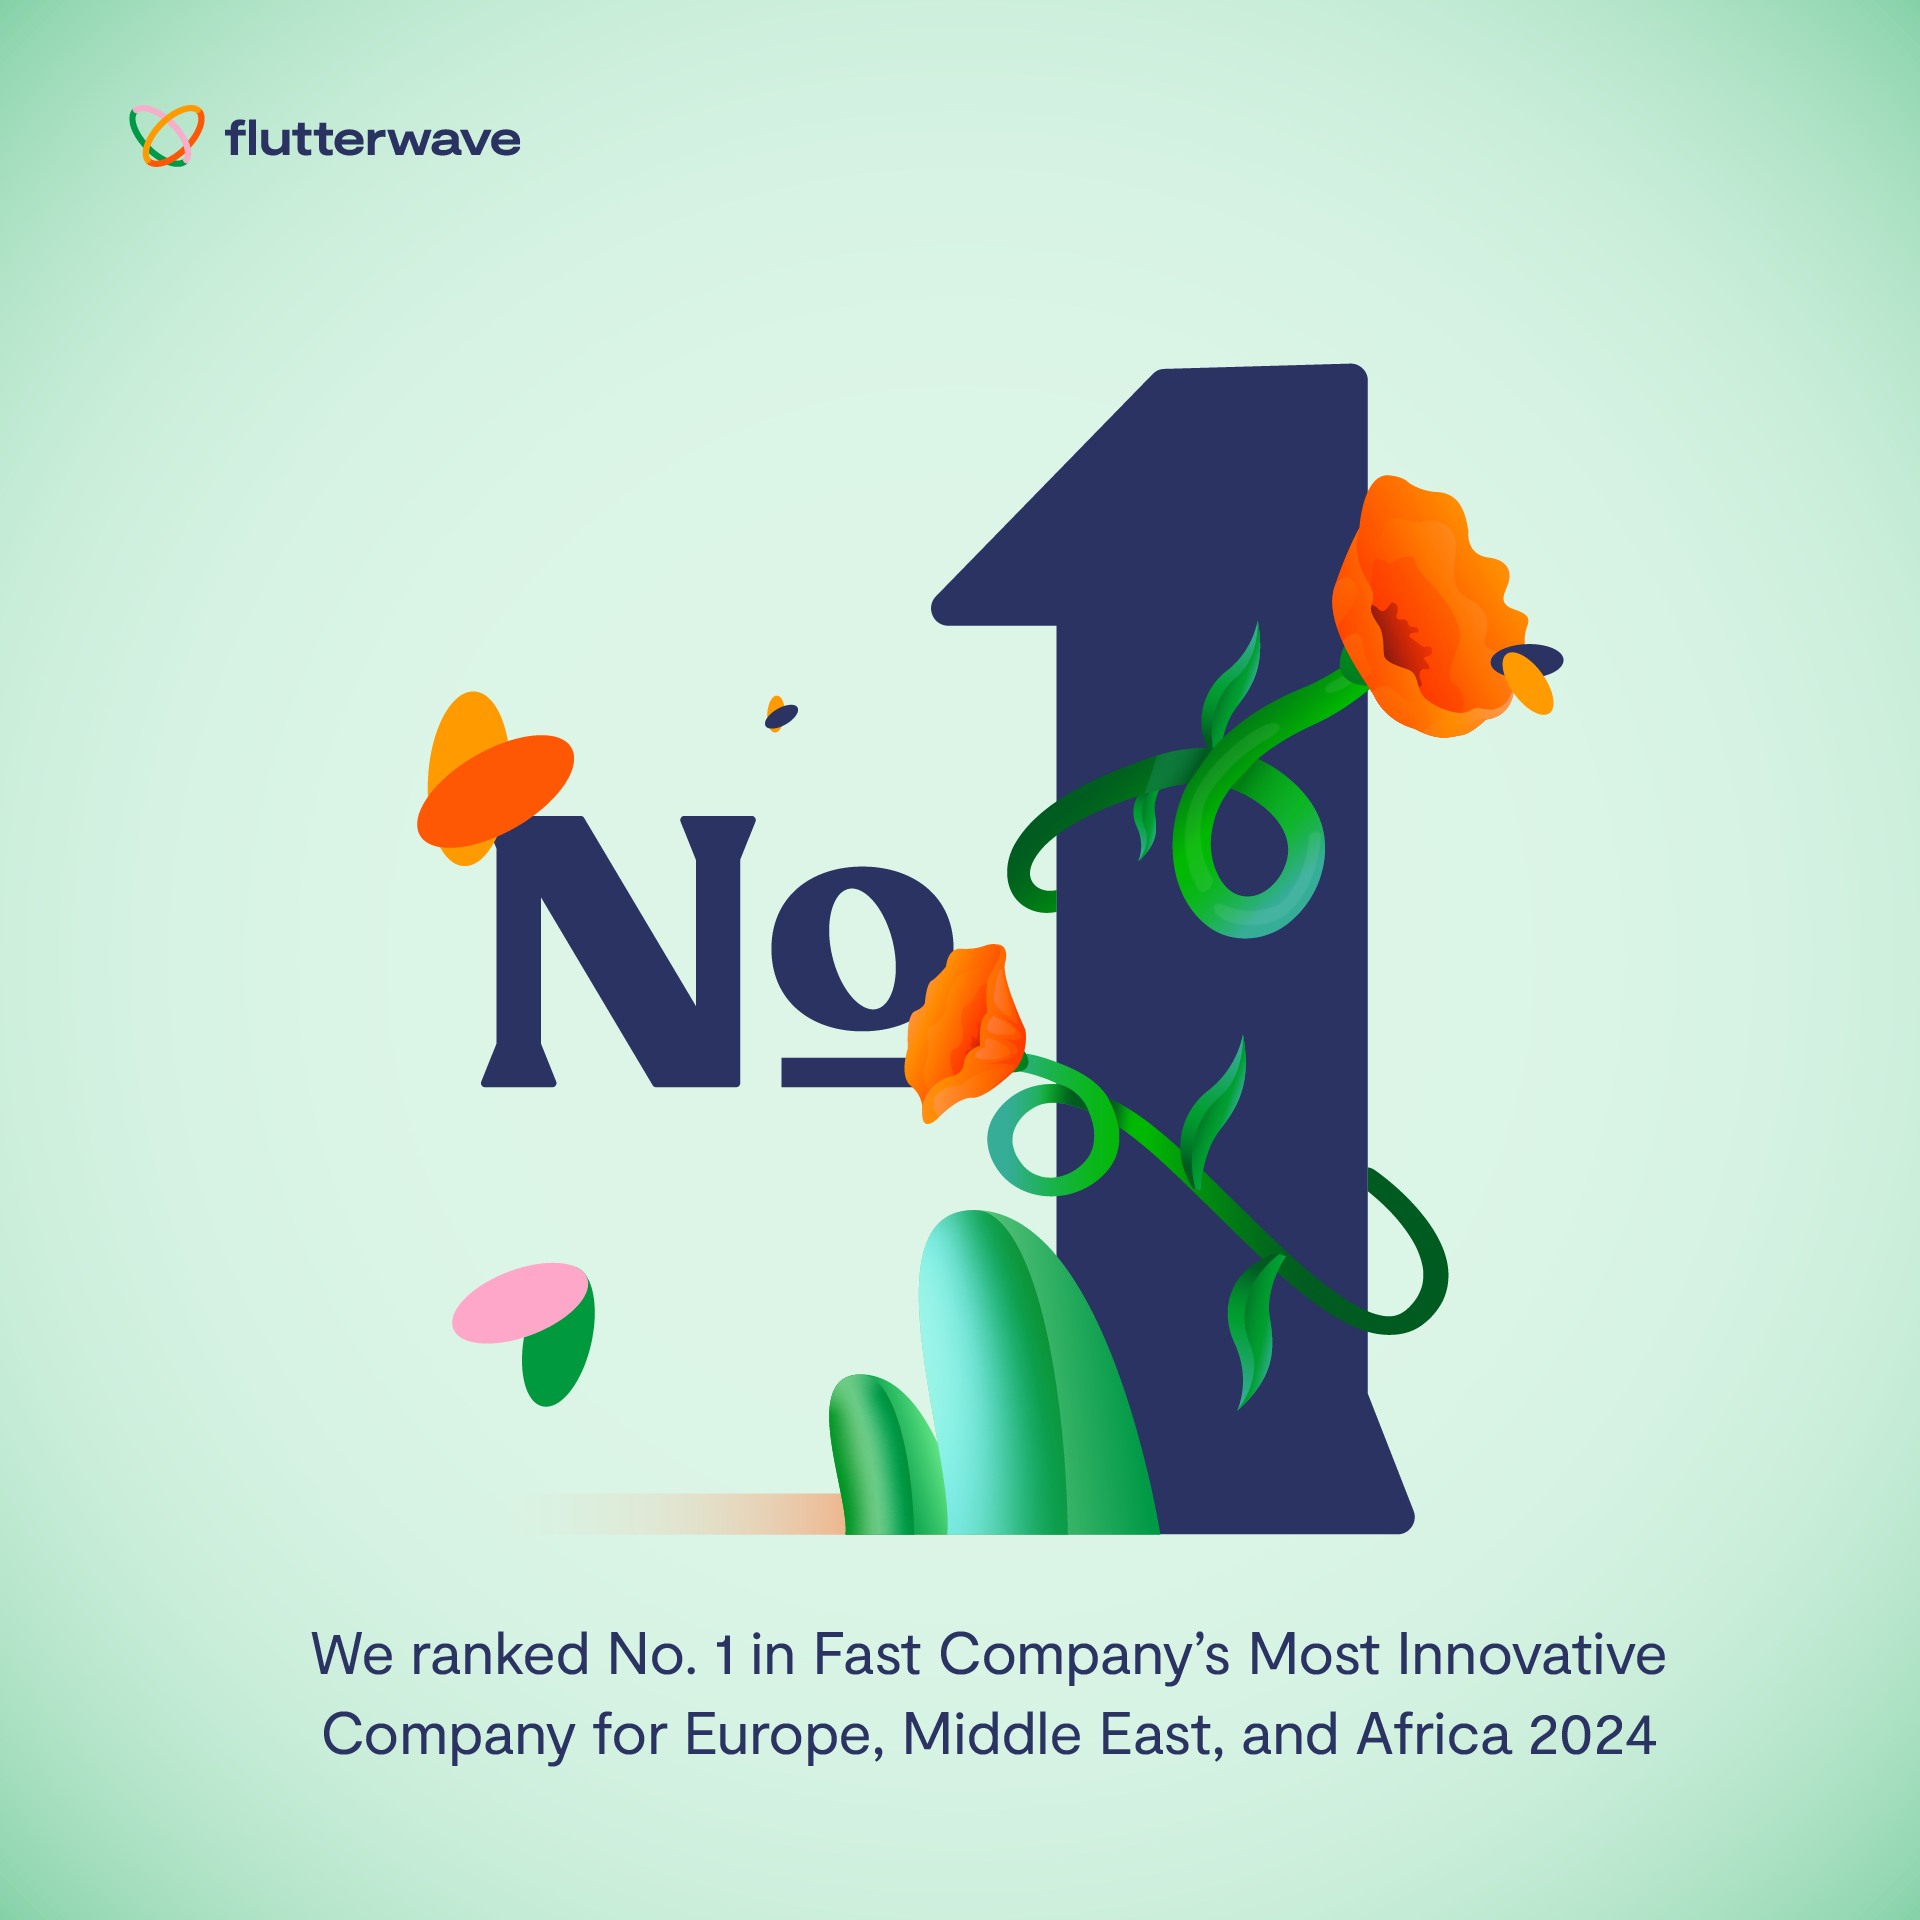 Flutterwave Named Fast Company’s Most Innovative Company for Europe, Middle East, and Africa 2024